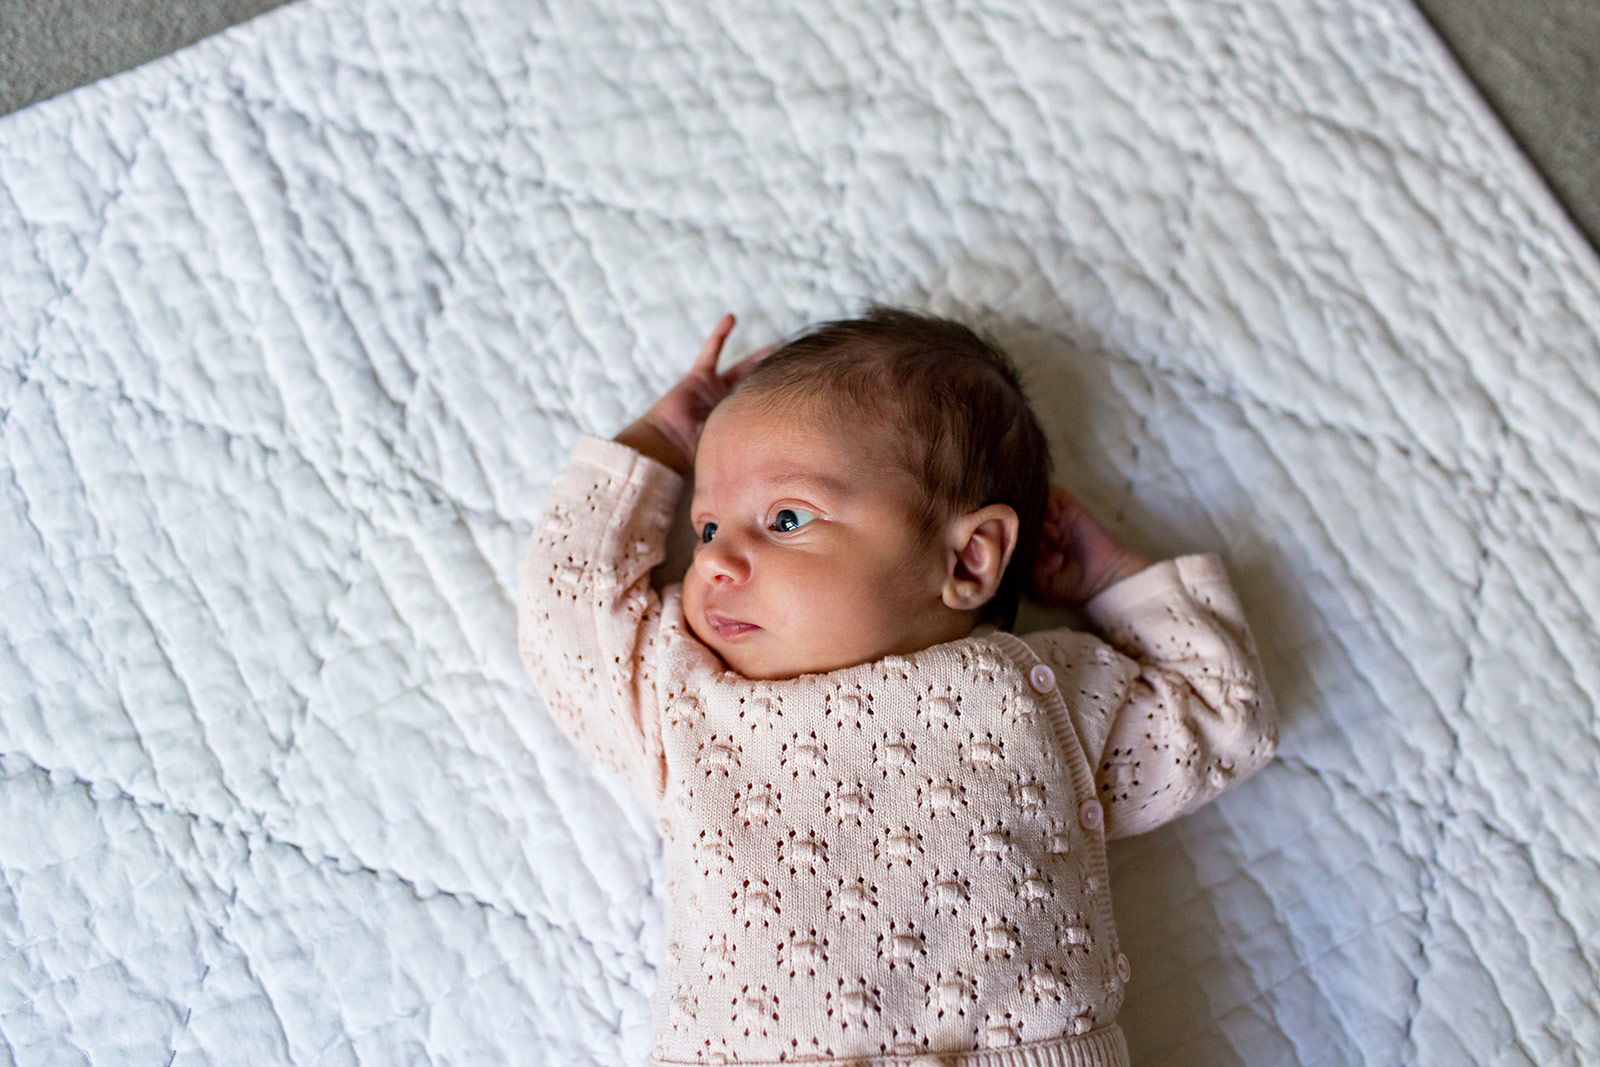 Baby Quinn, dressed in a cute sweater, lies on her quilt.